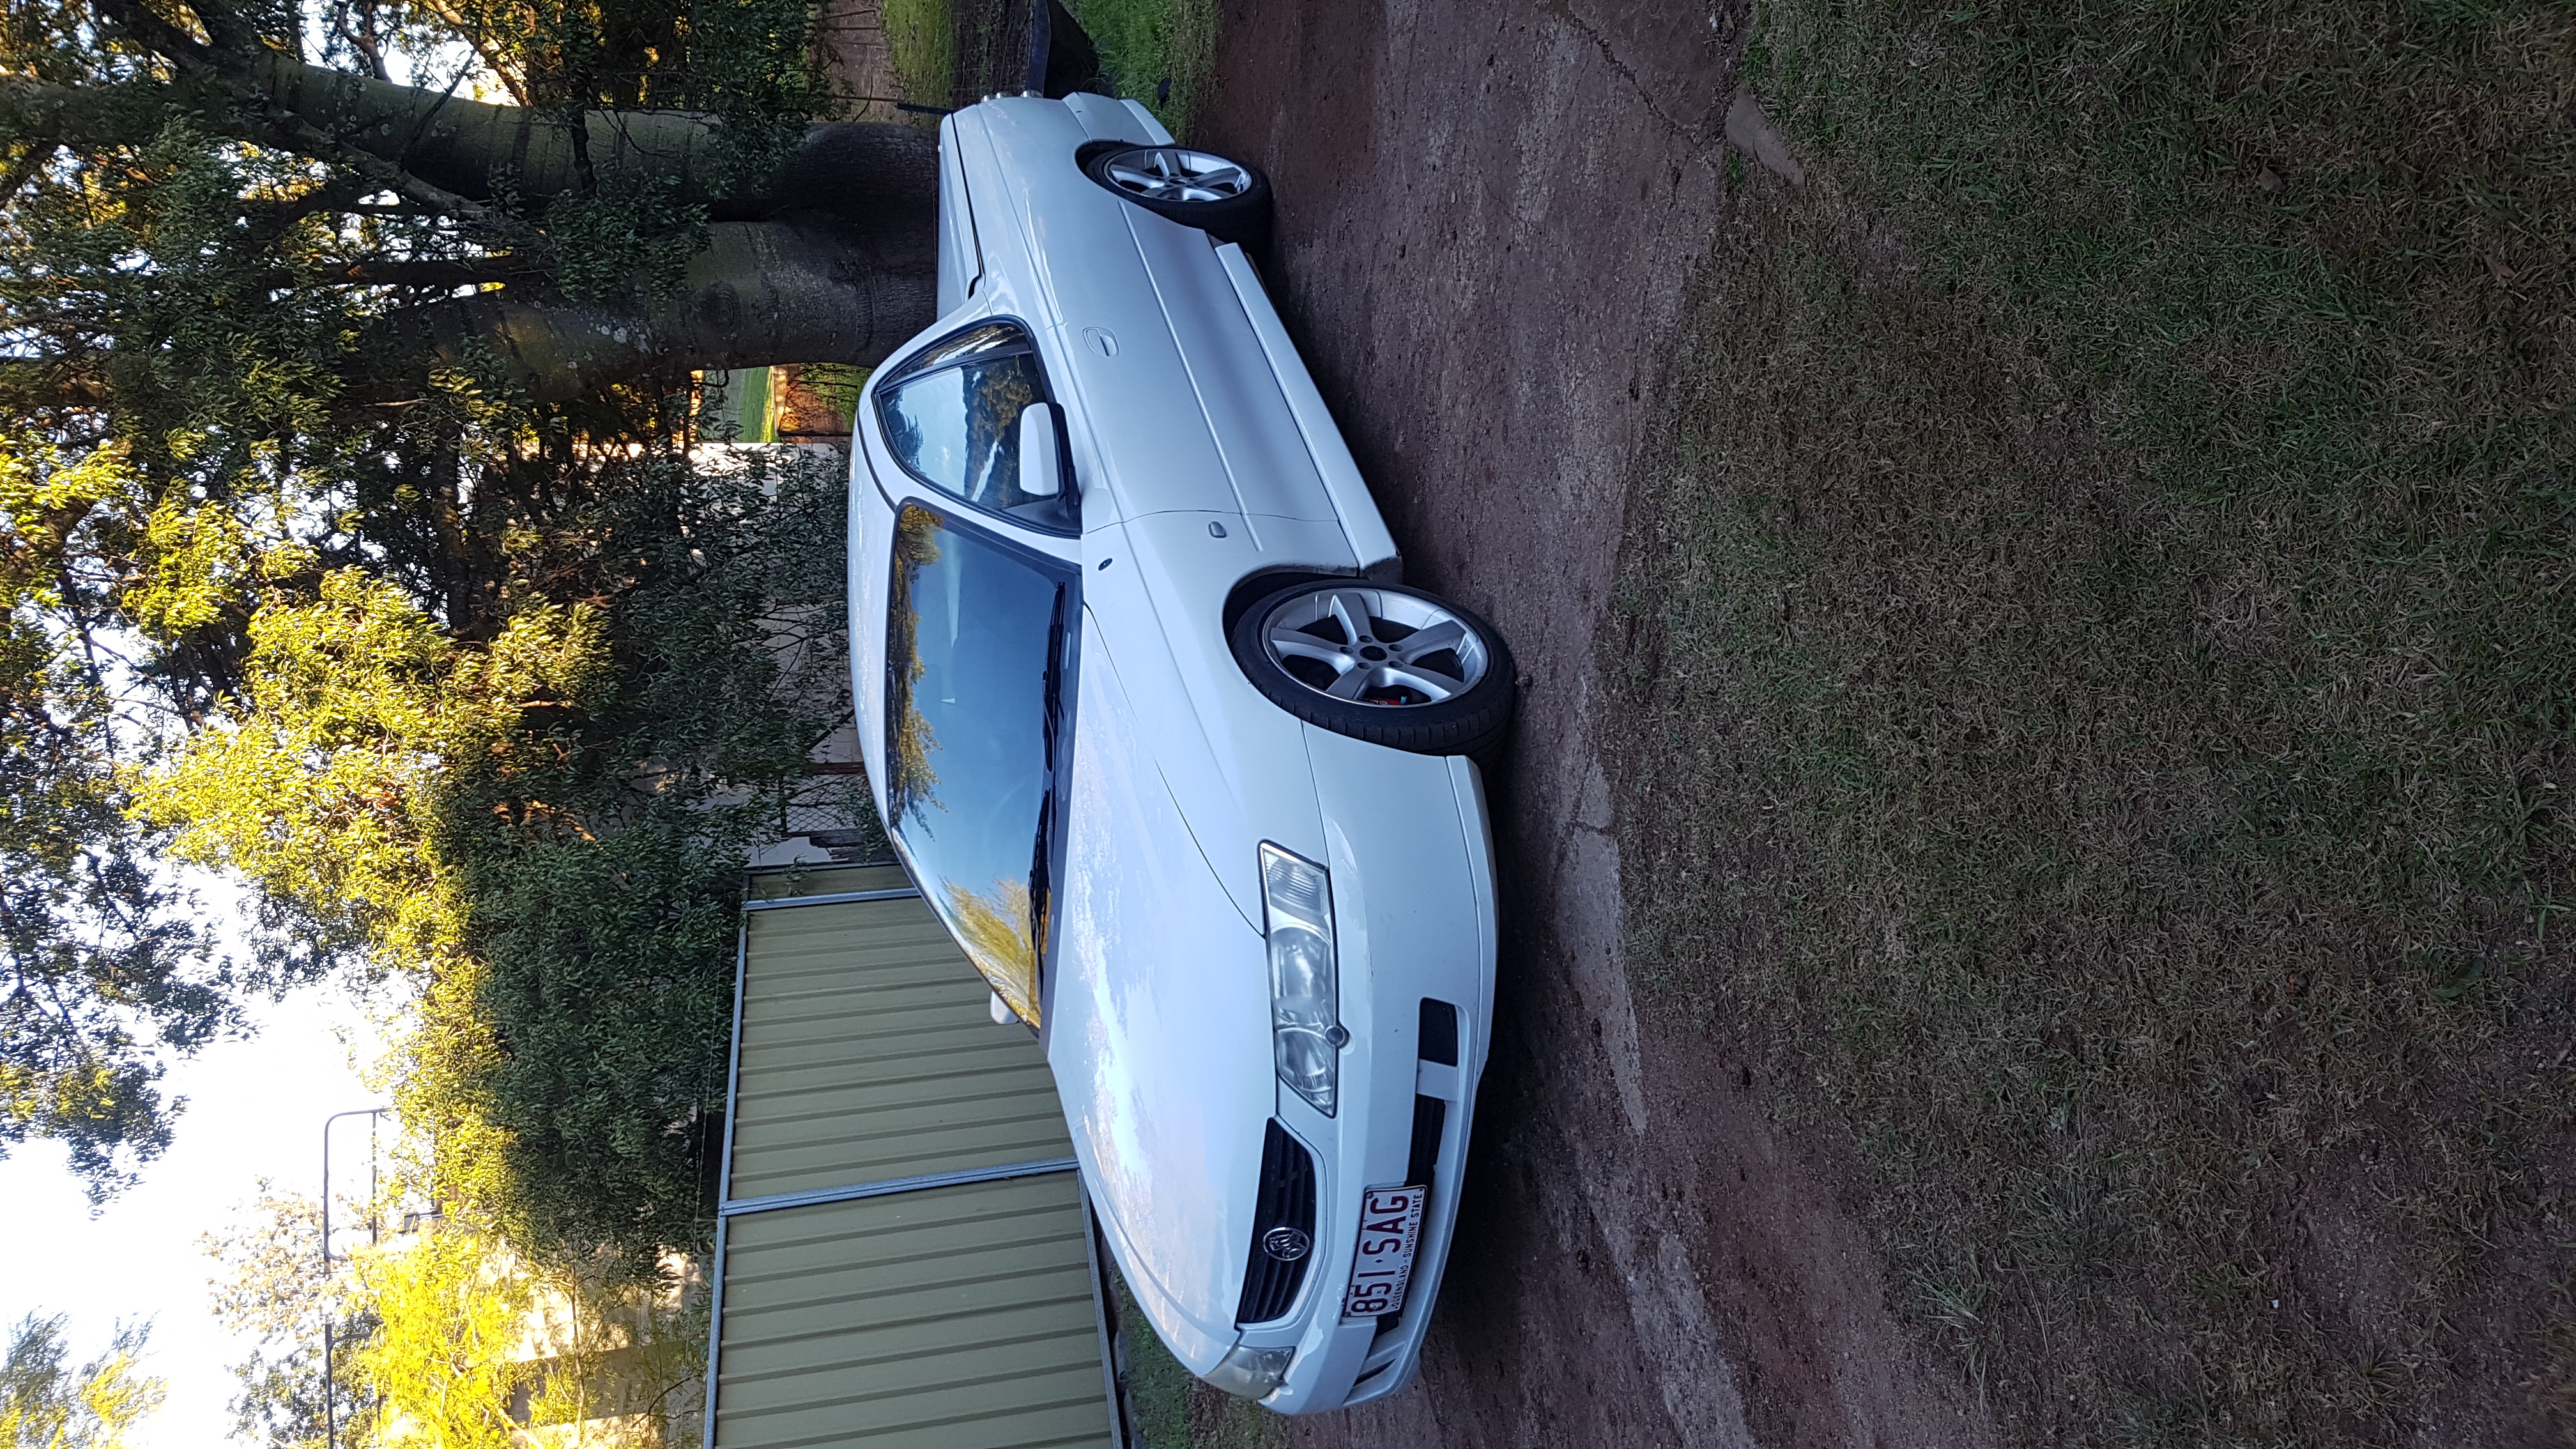 2003 Holden Commodore VY